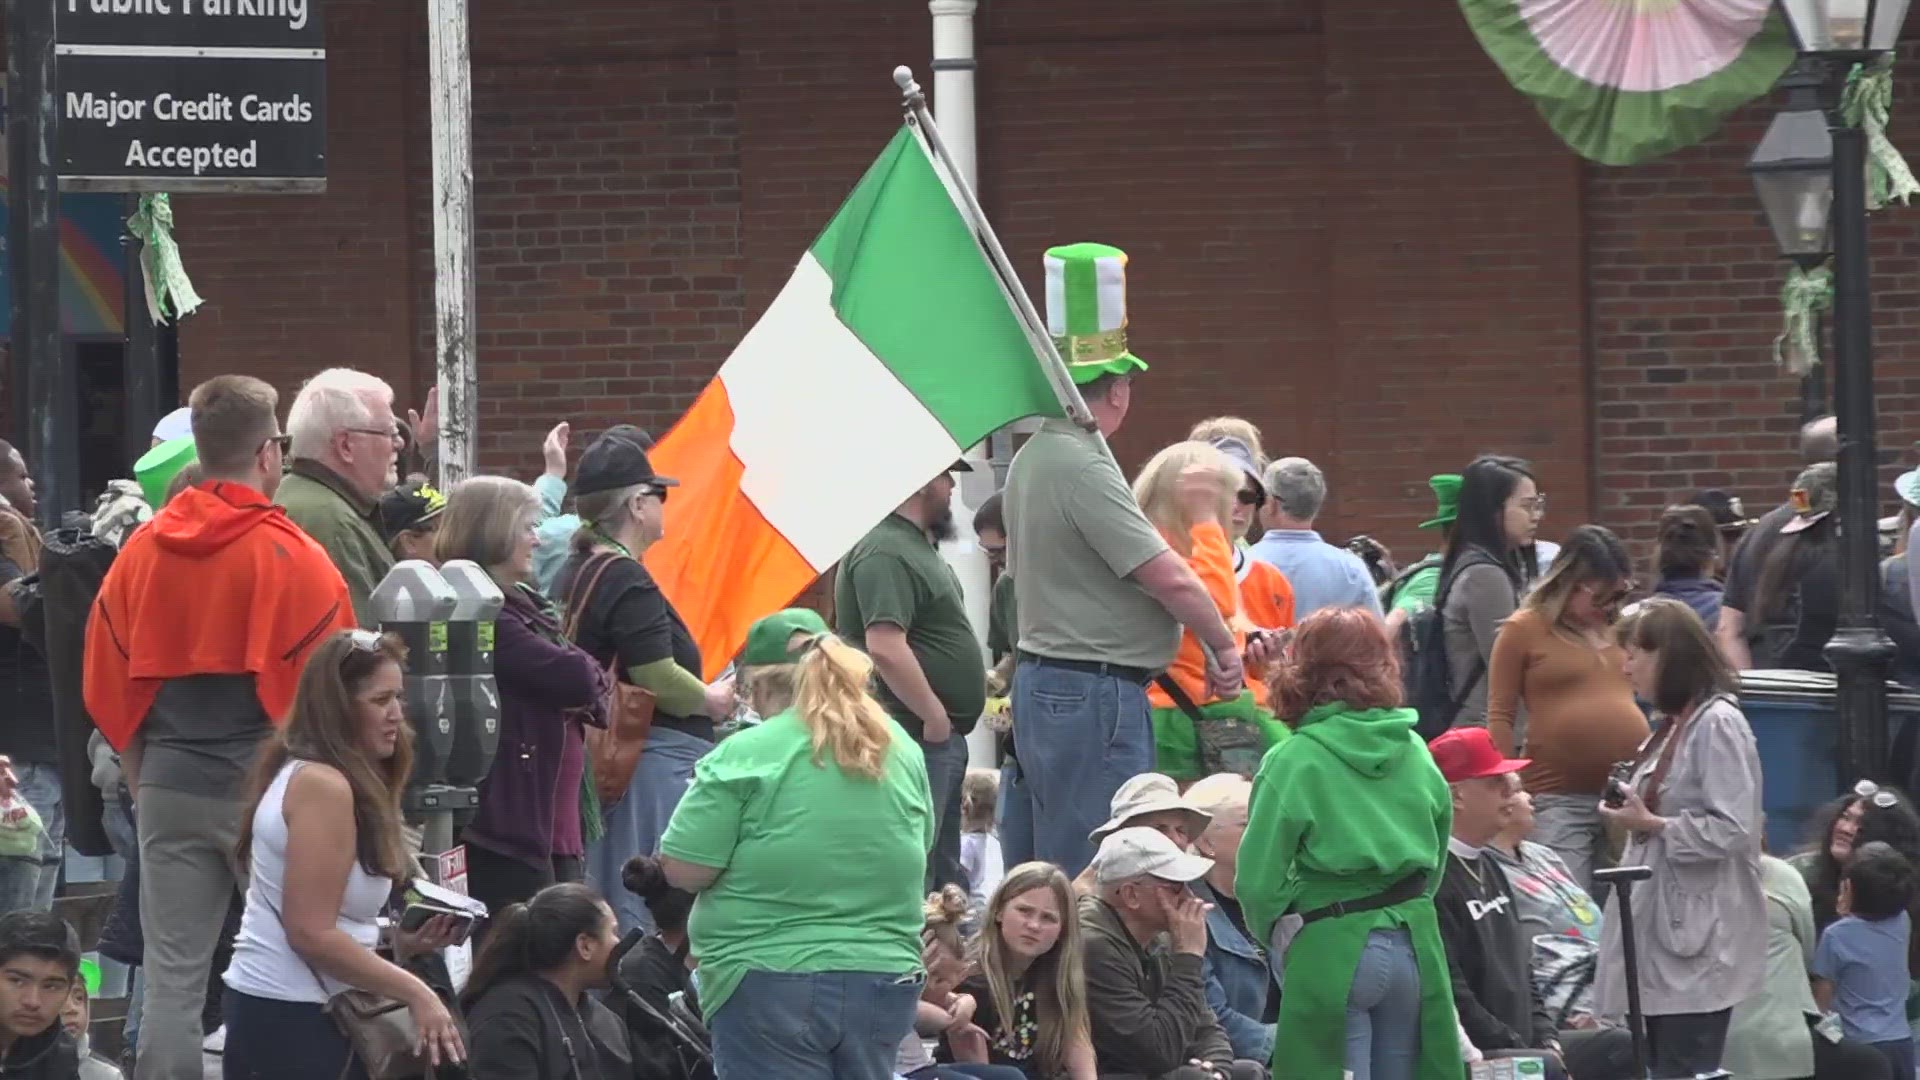 Though St. Patrick's Day was Friday, hundreds of people flocked to the streets of Old Sacramento to celebrate with an elaborate parade.